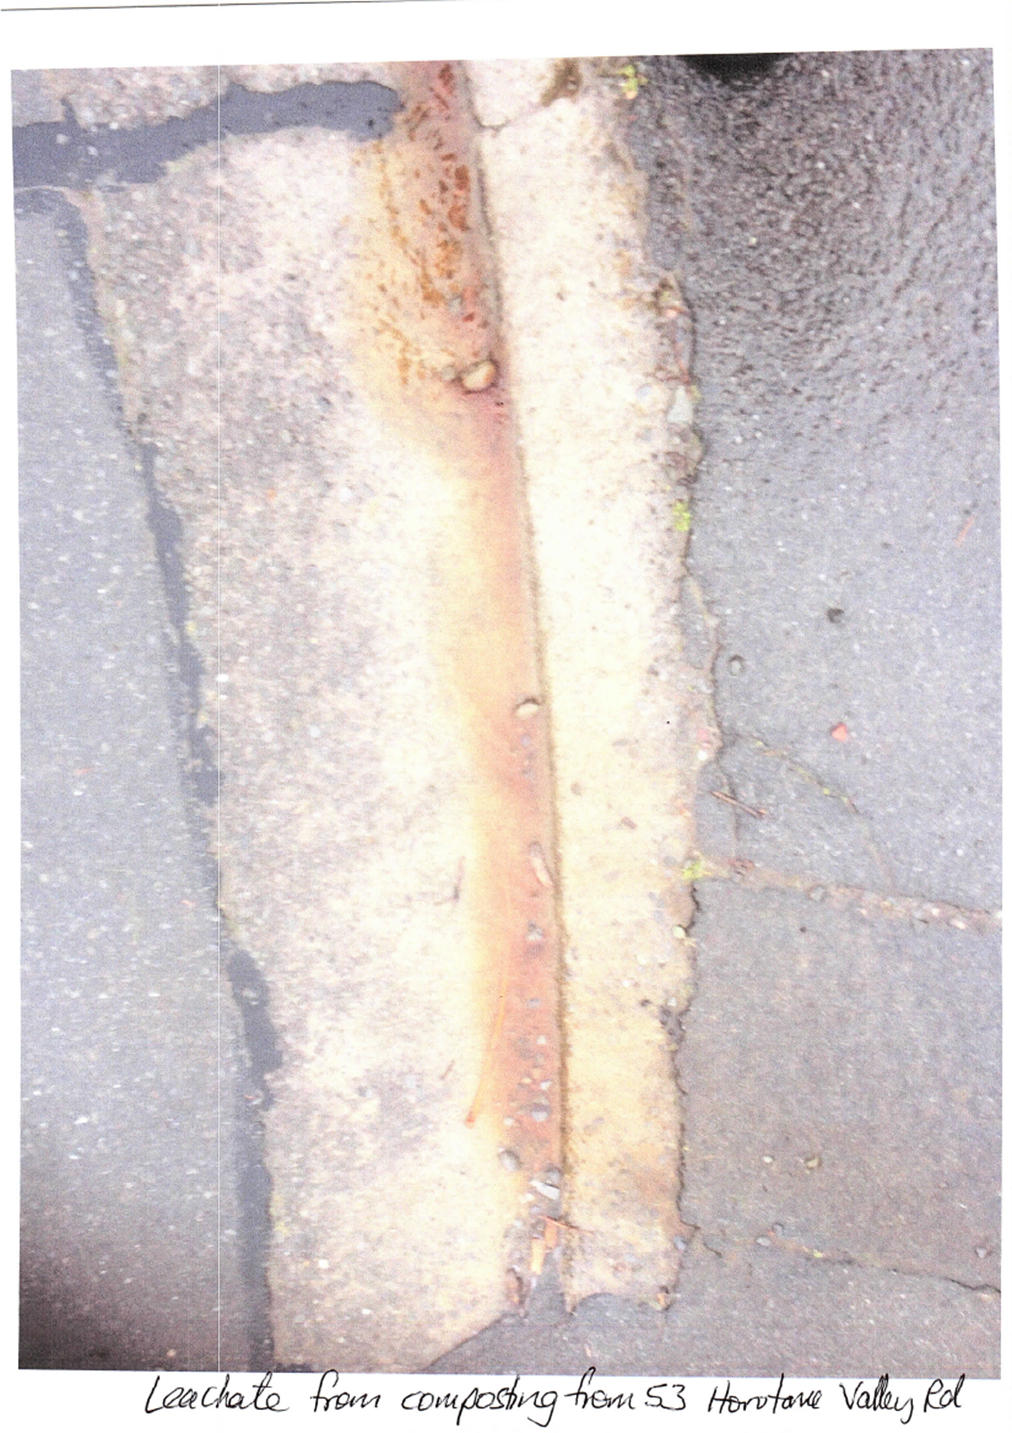 A close-up of a crack in the pavement

Description automatically generated